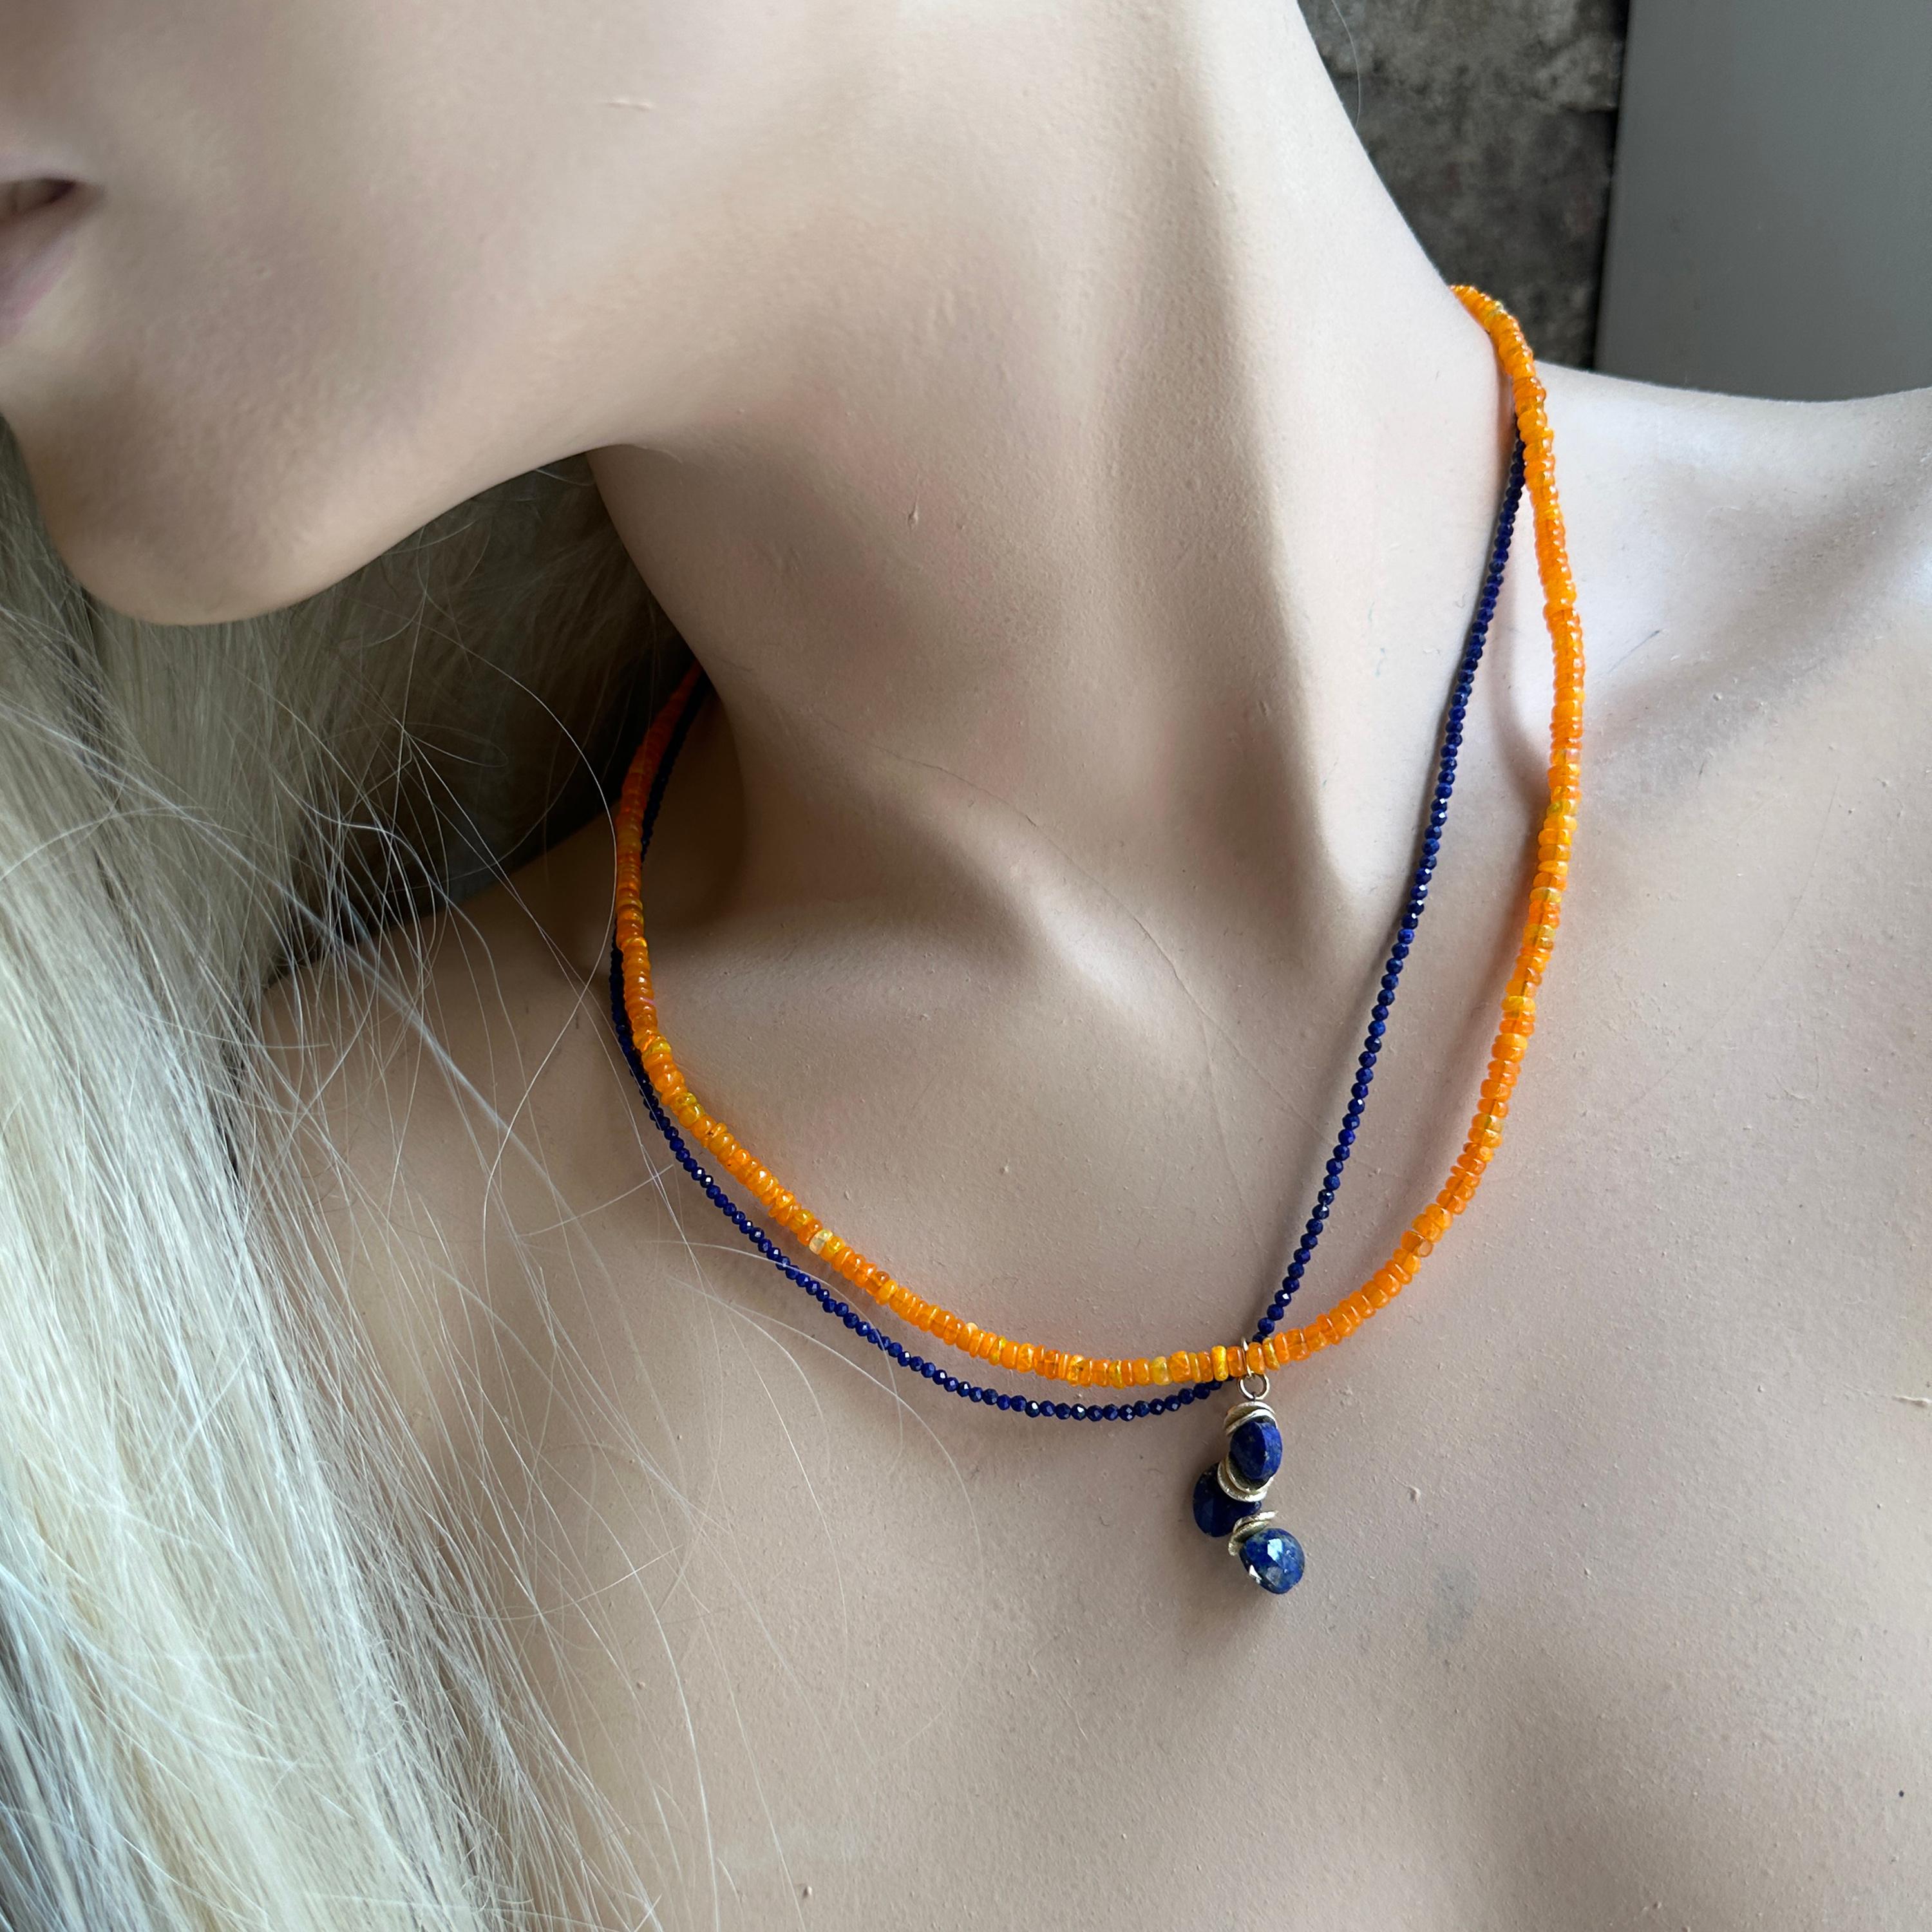  Featuring a double strand of stunning small lapis beads paired with brilliant bright orange opal rondels, this exquisite necklace is finished with a 14K gold filled lobster clasp and a delightful 1